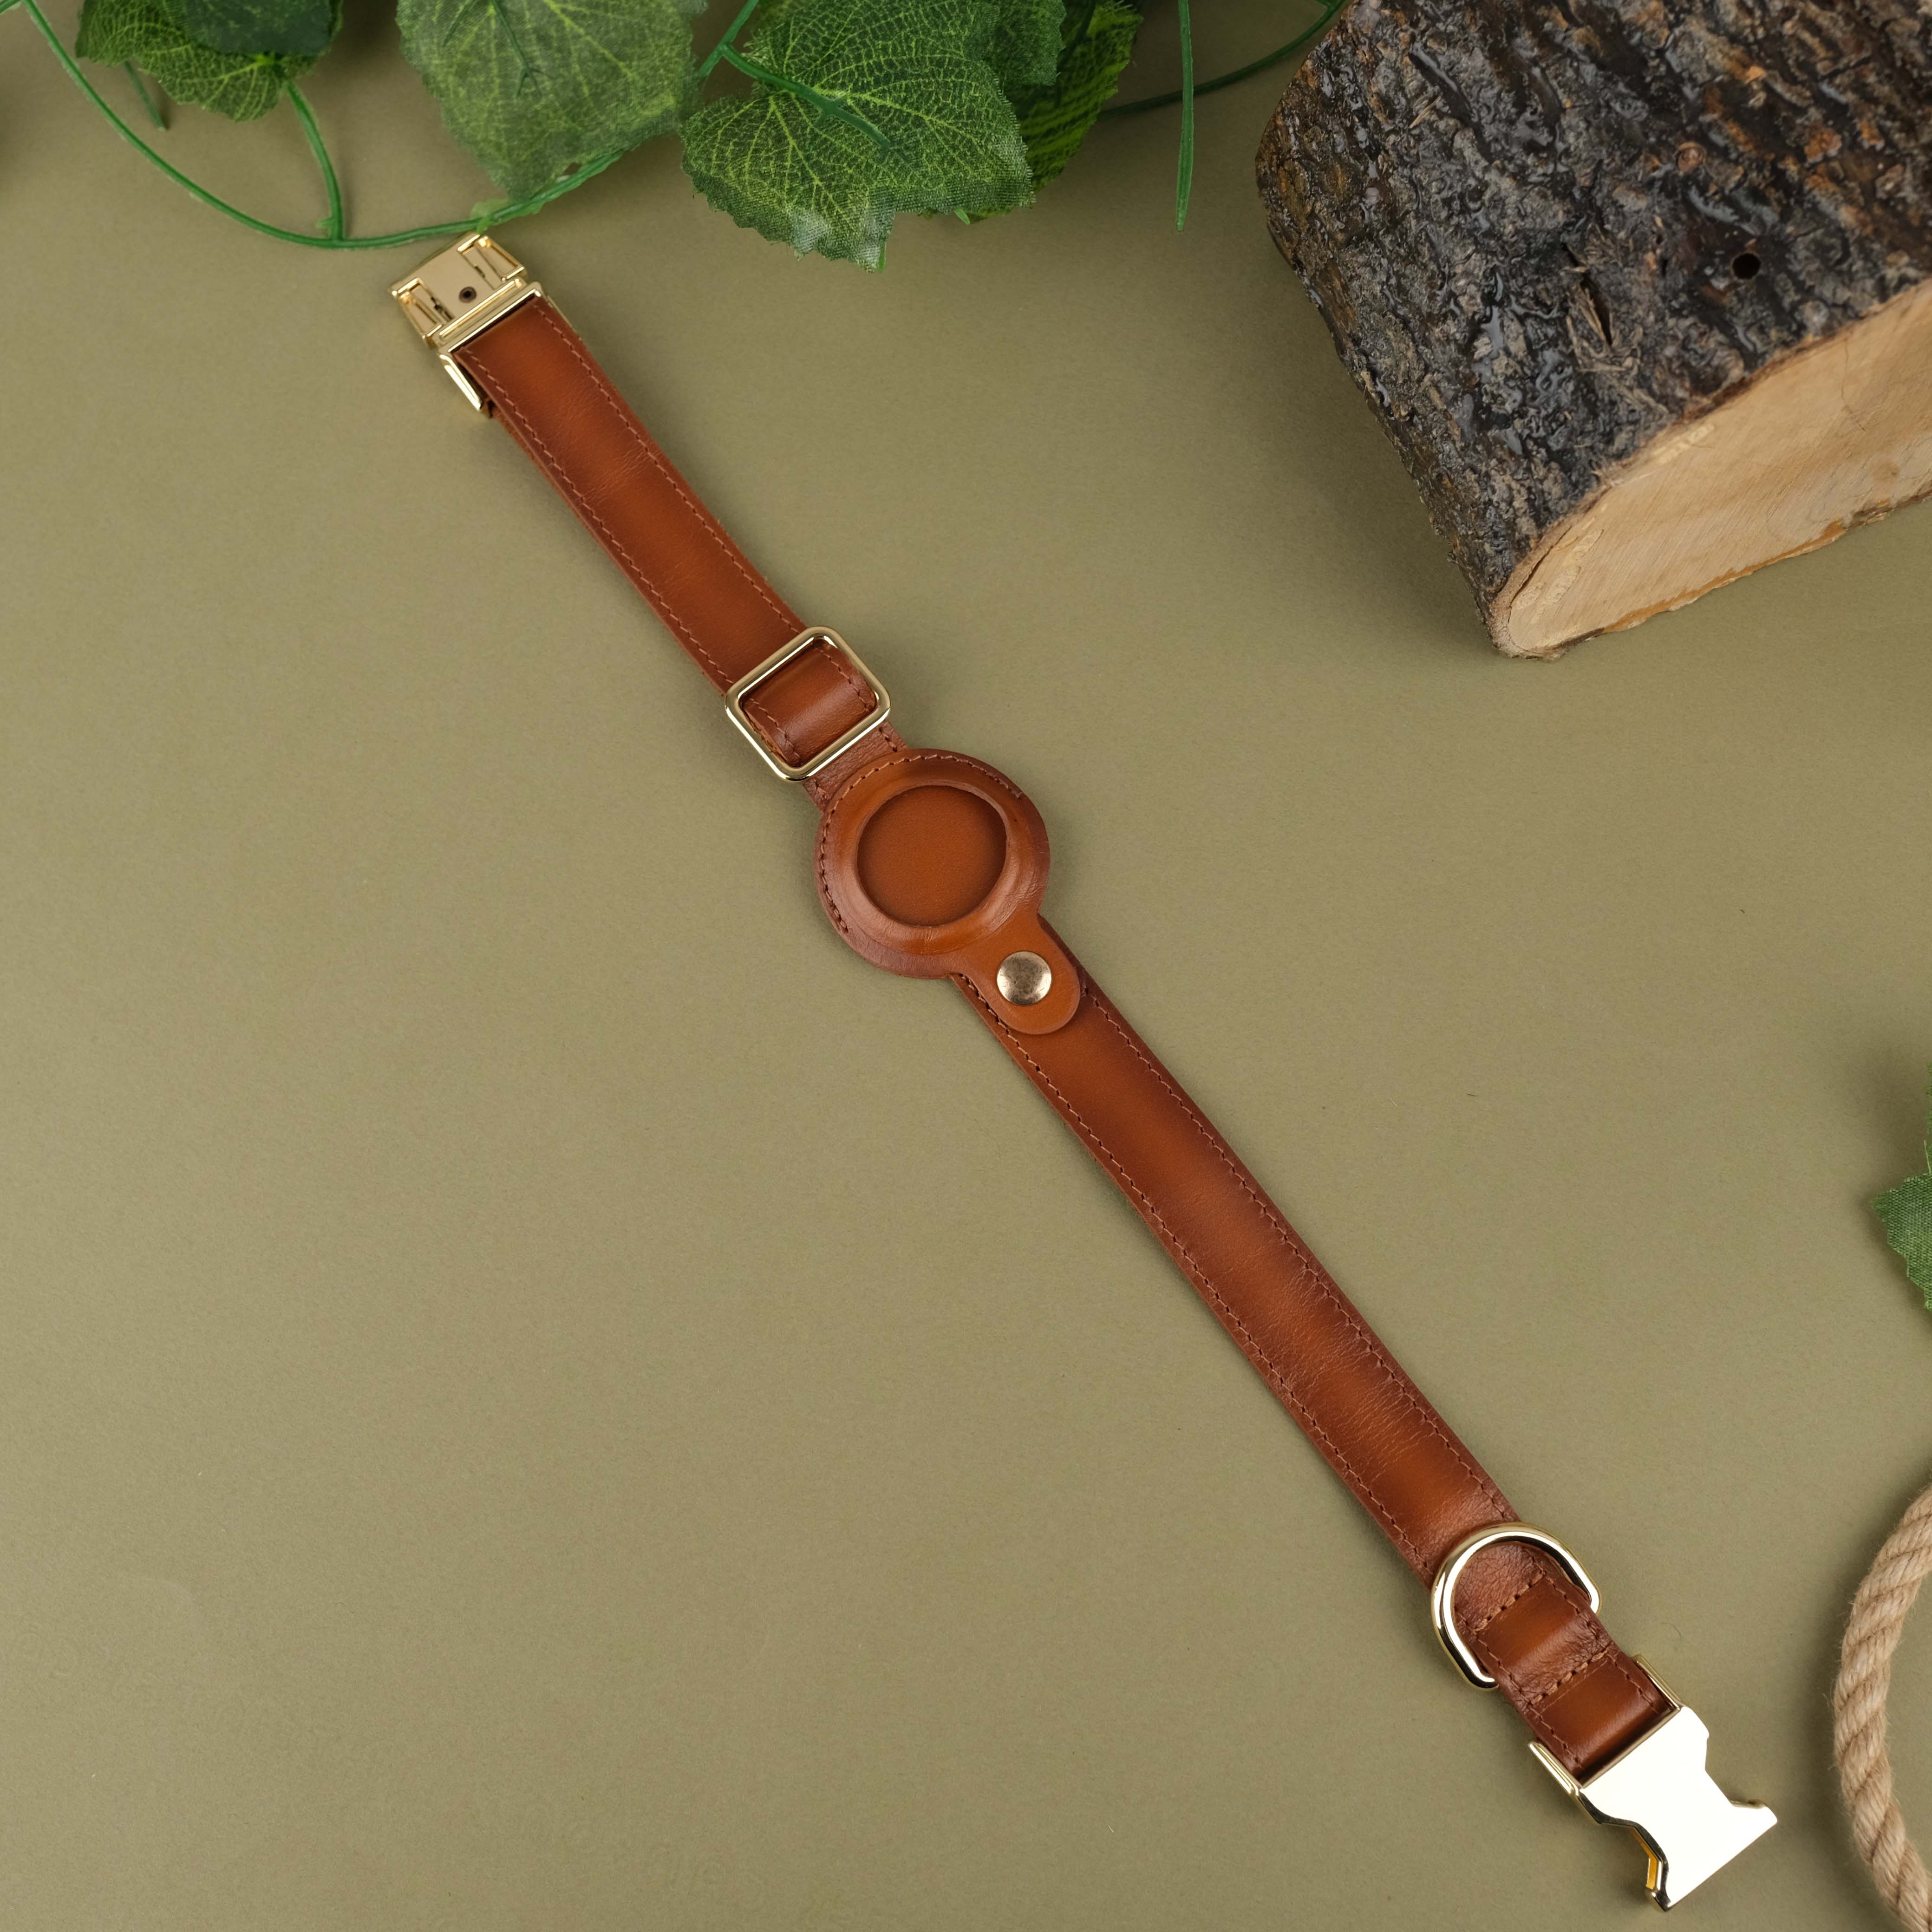 Tan Handcrafted Leather Dog Collar with Airtag Slot